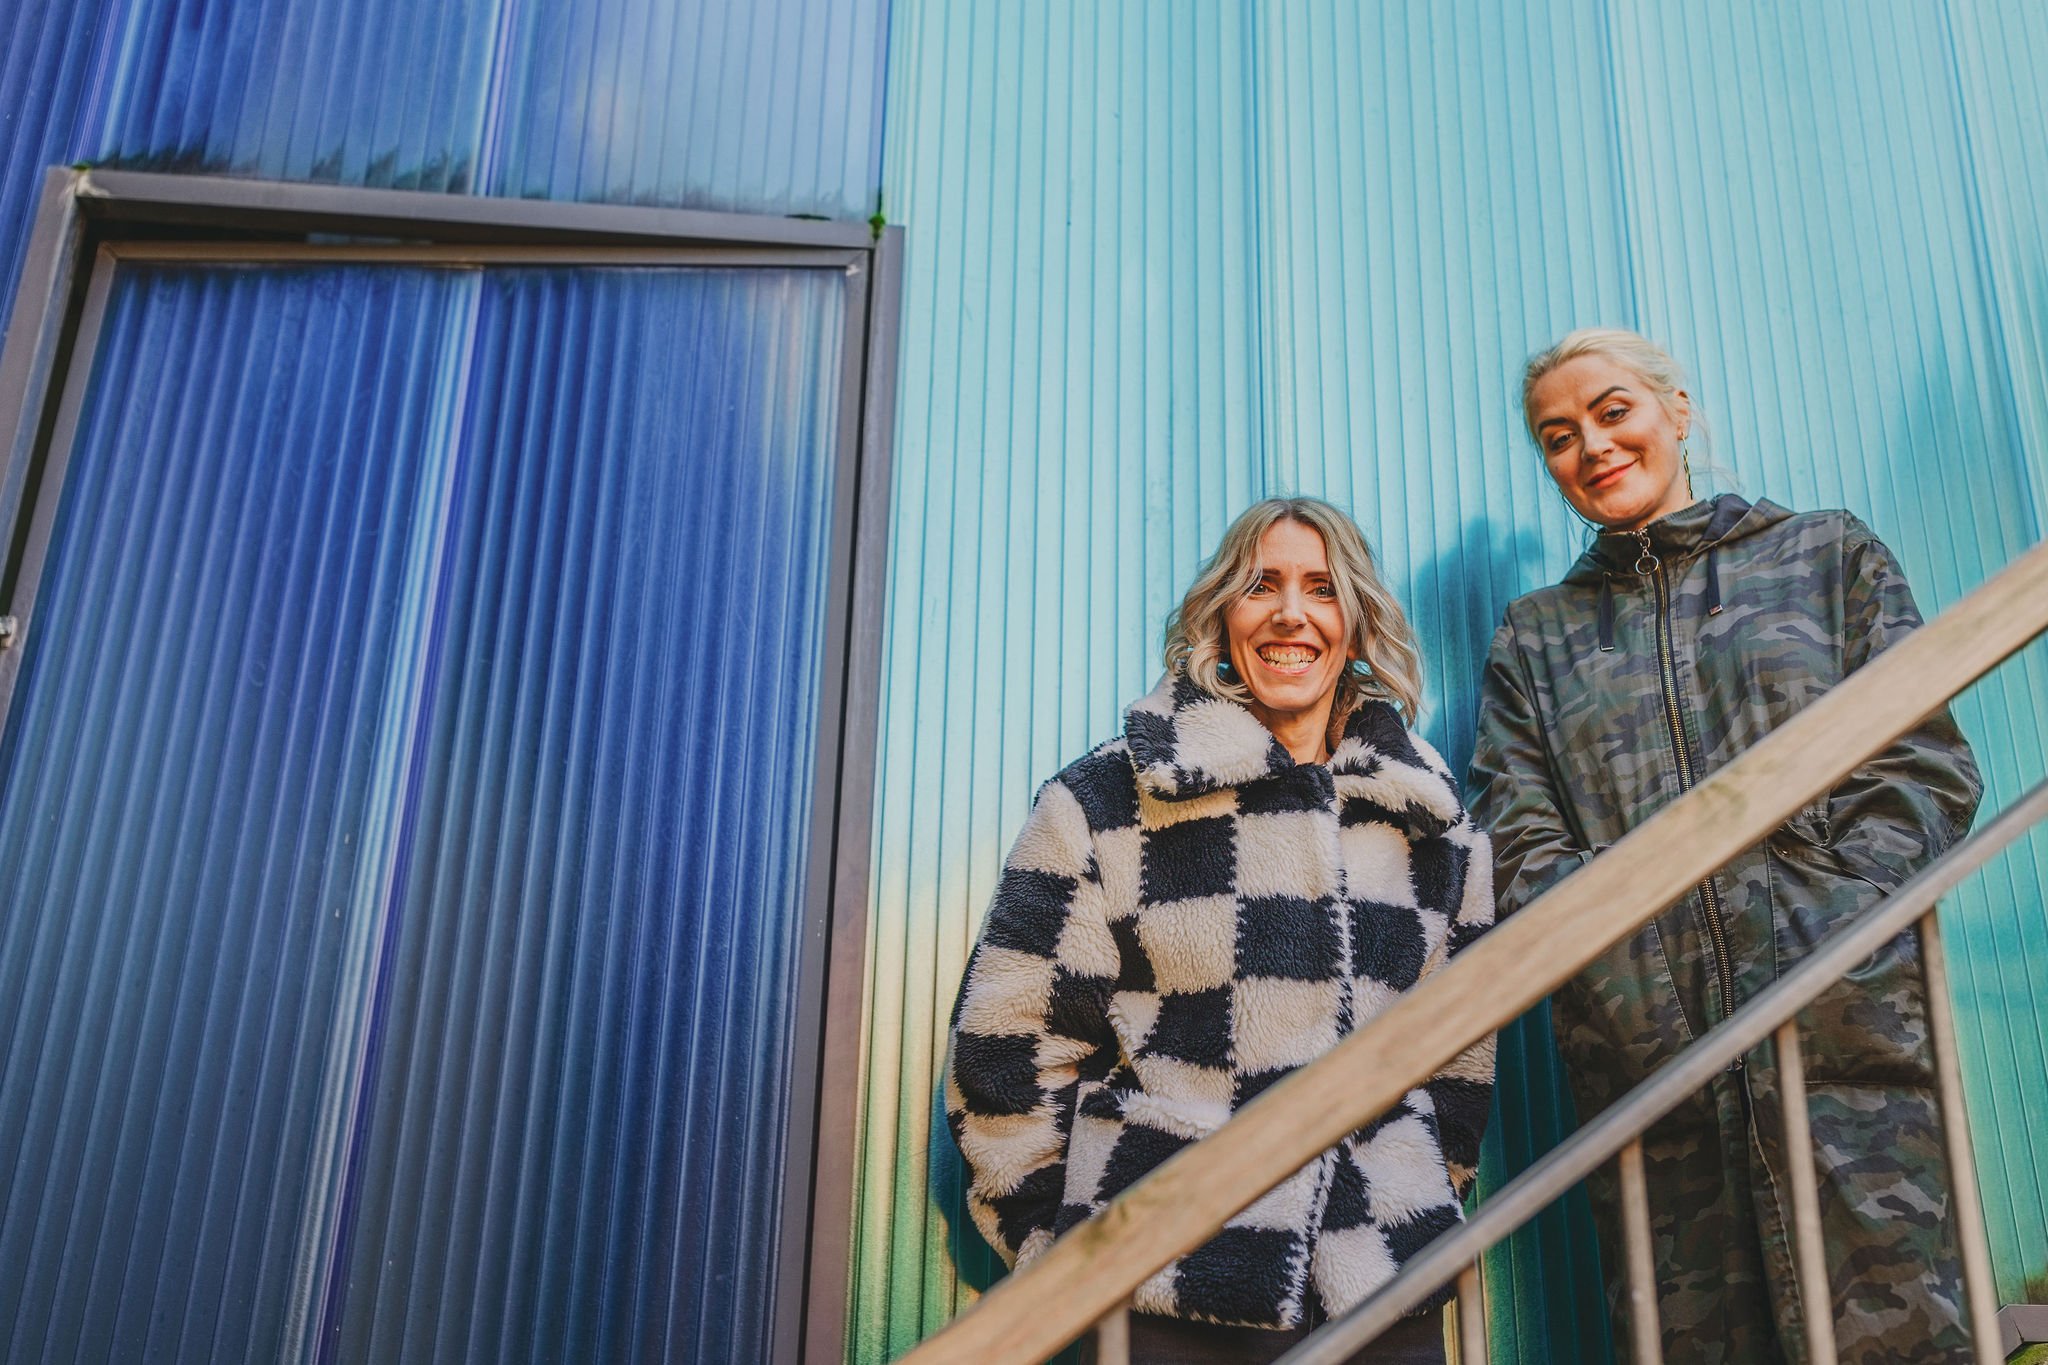  Melissa, founder of The Un-Wedding and Helen stood on metal staircase in front of corrugated metal painted blue whilst at The Un-Wedding Show Bristol. 